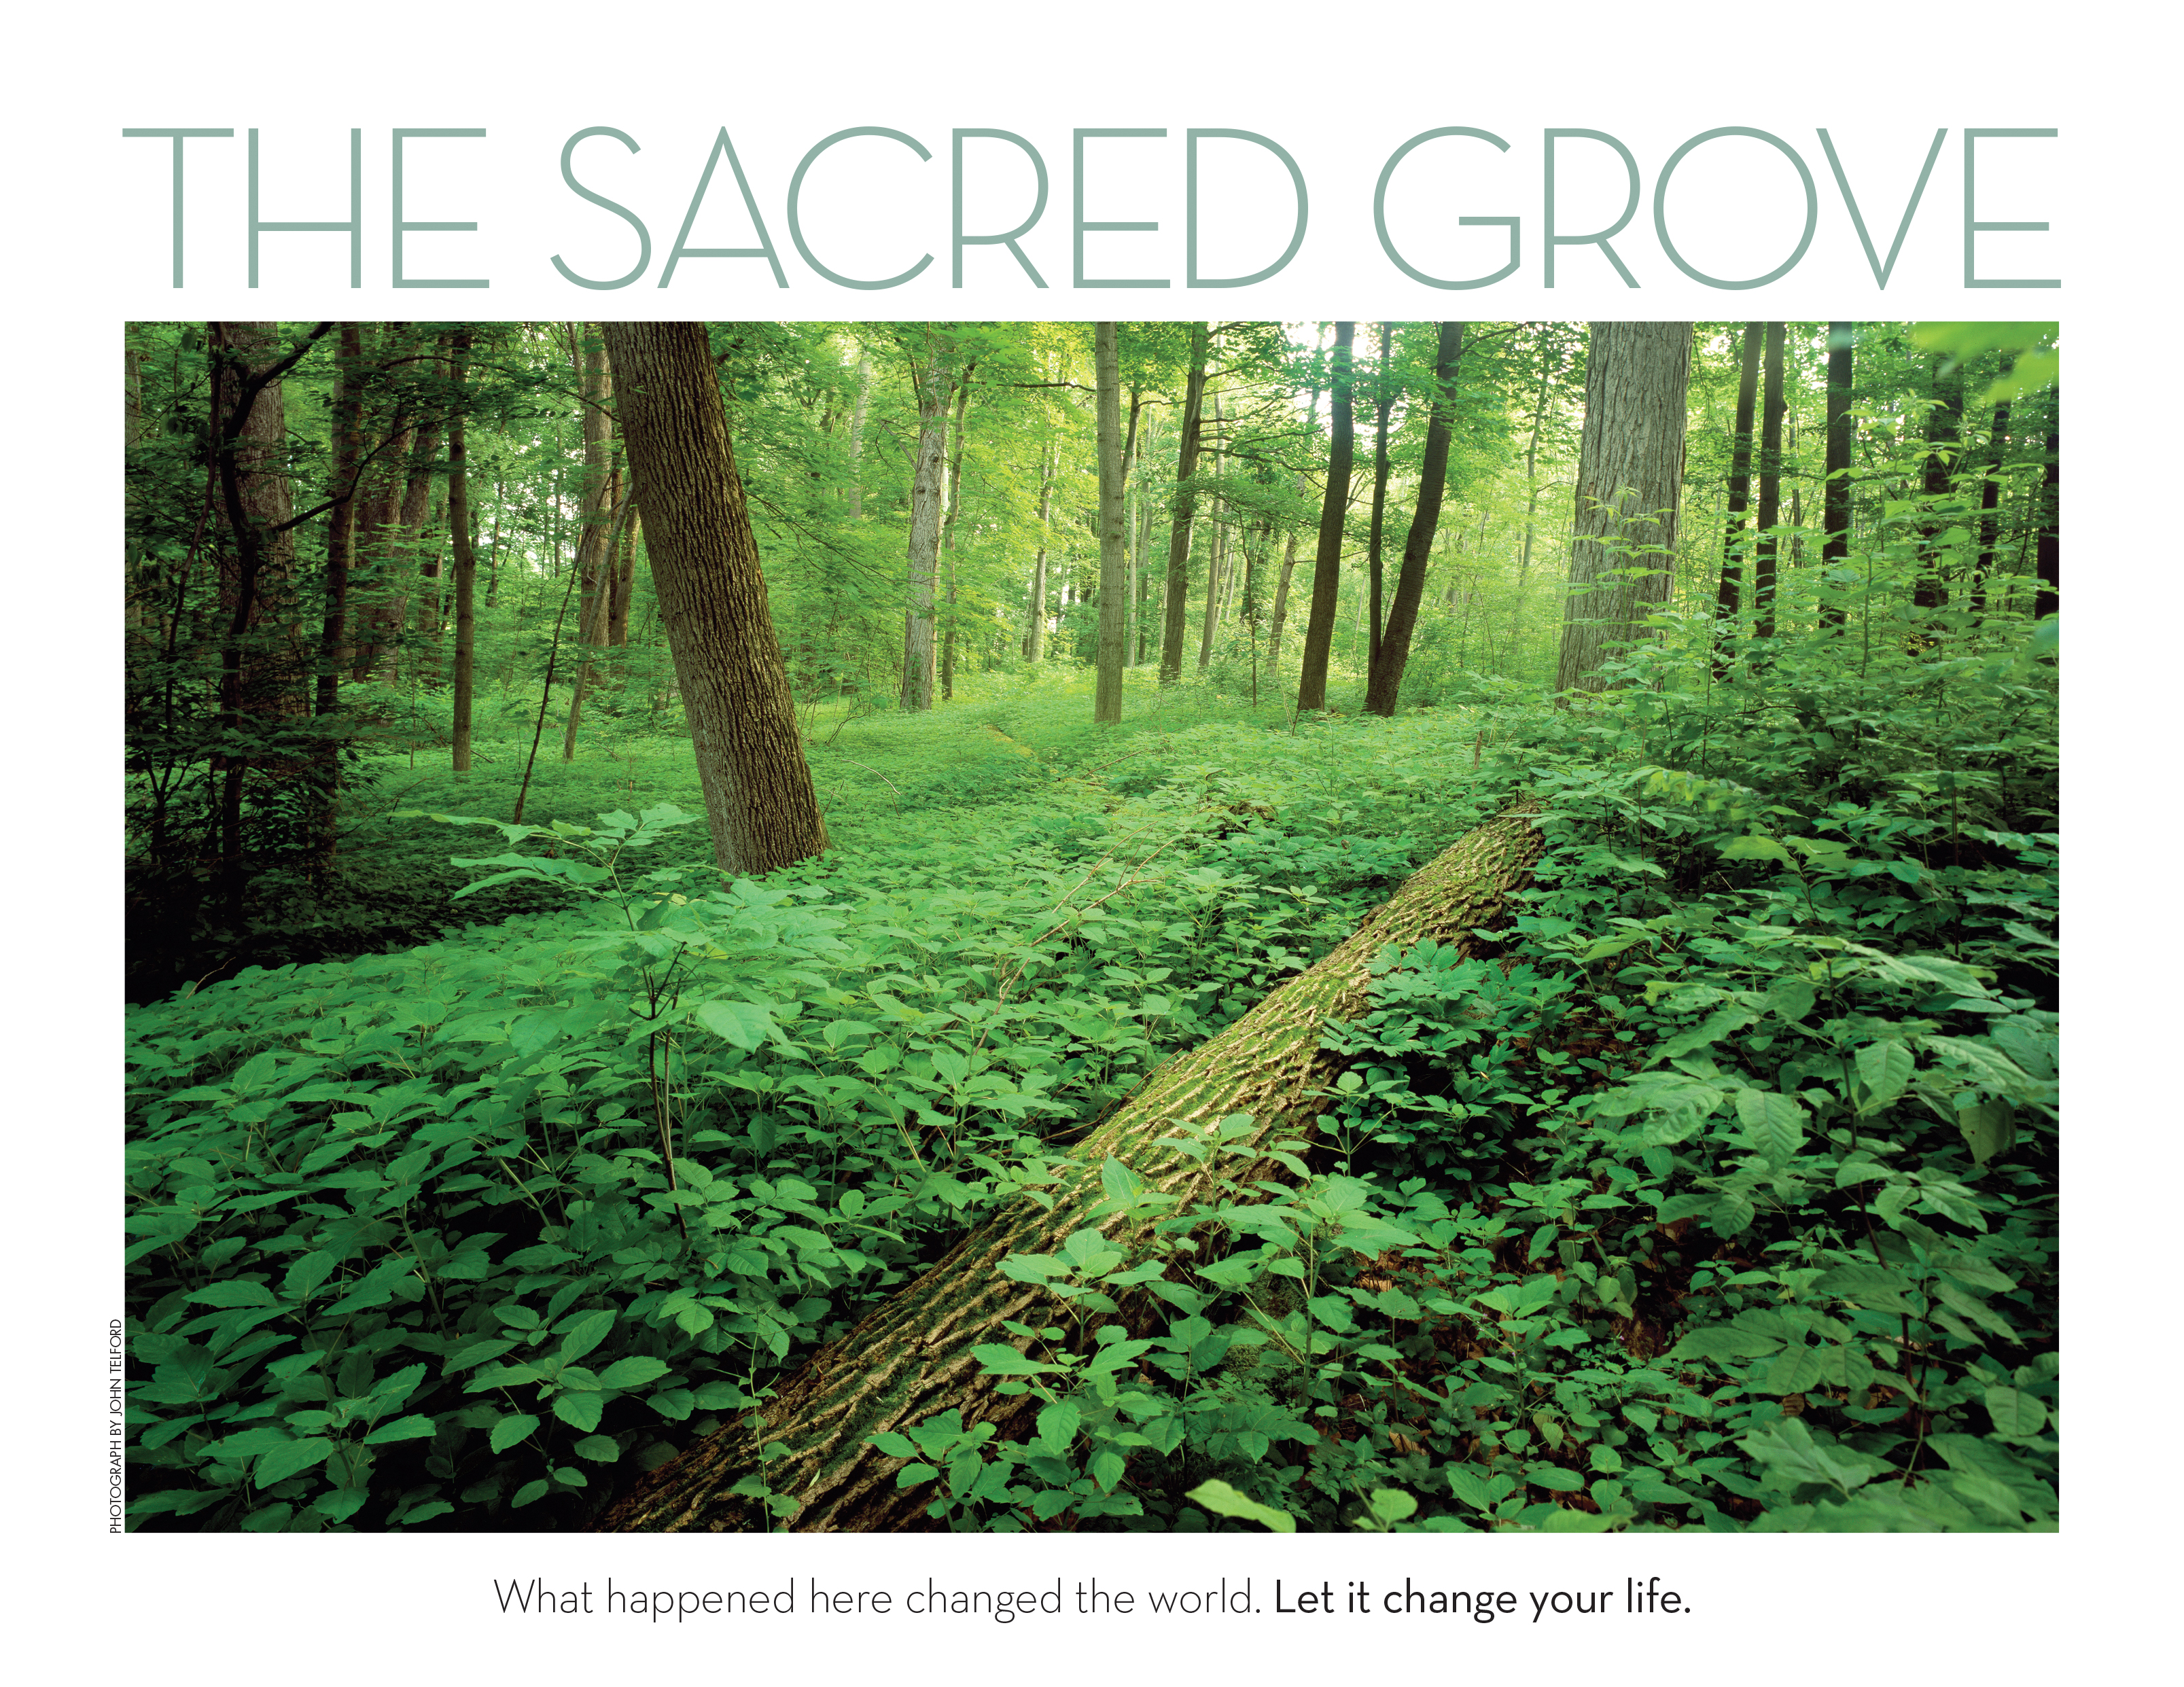 A photograph of the Sacred Grove bordered by the words, “The Sacred Grove: What happened here changed the world. Let it change your life.”